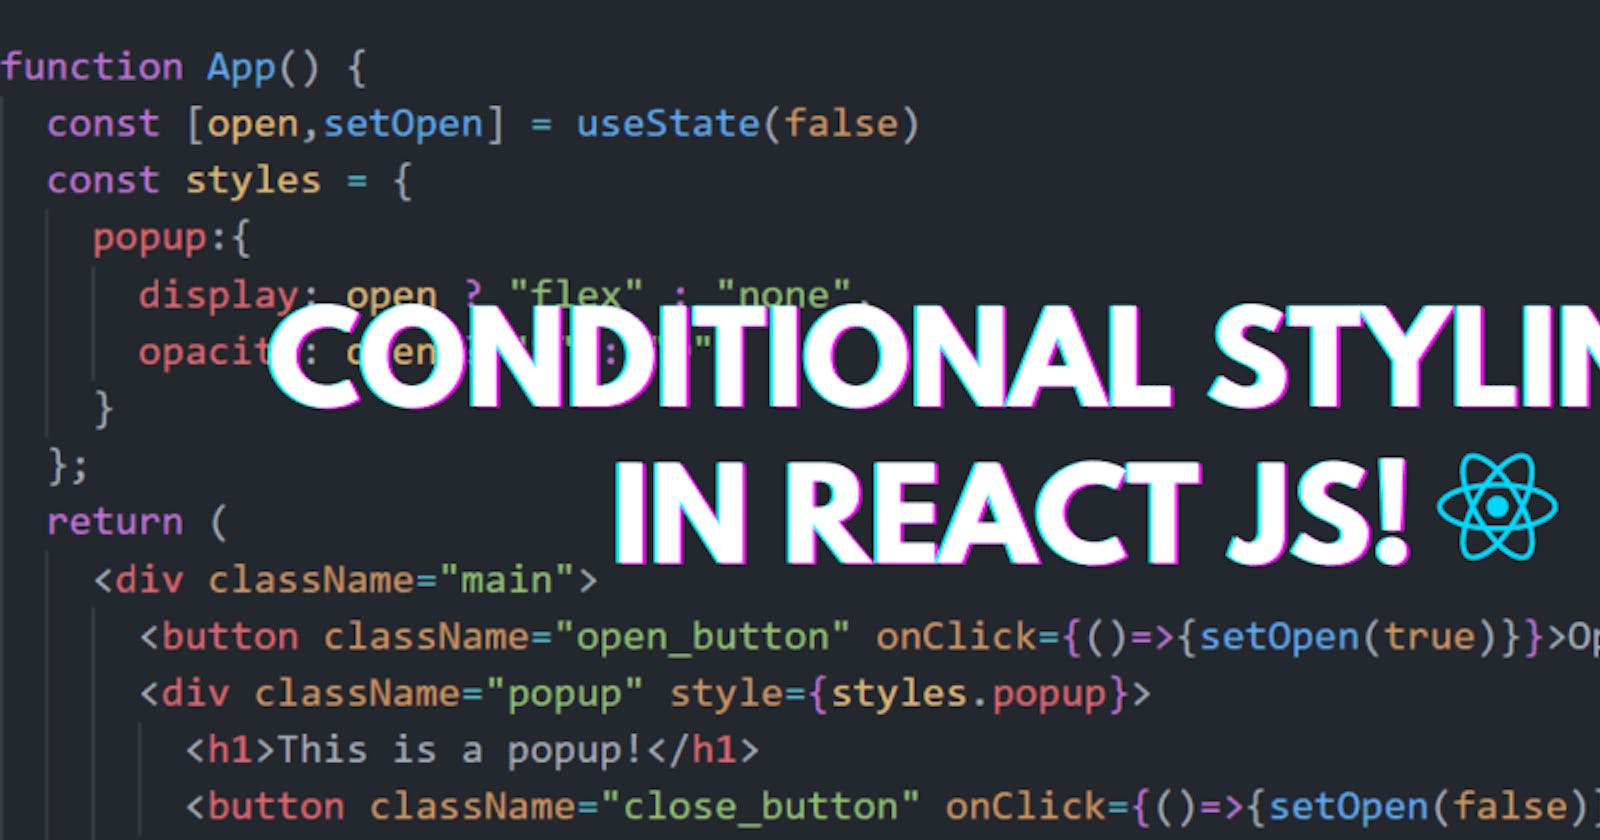 Conditional Styling in React JS!